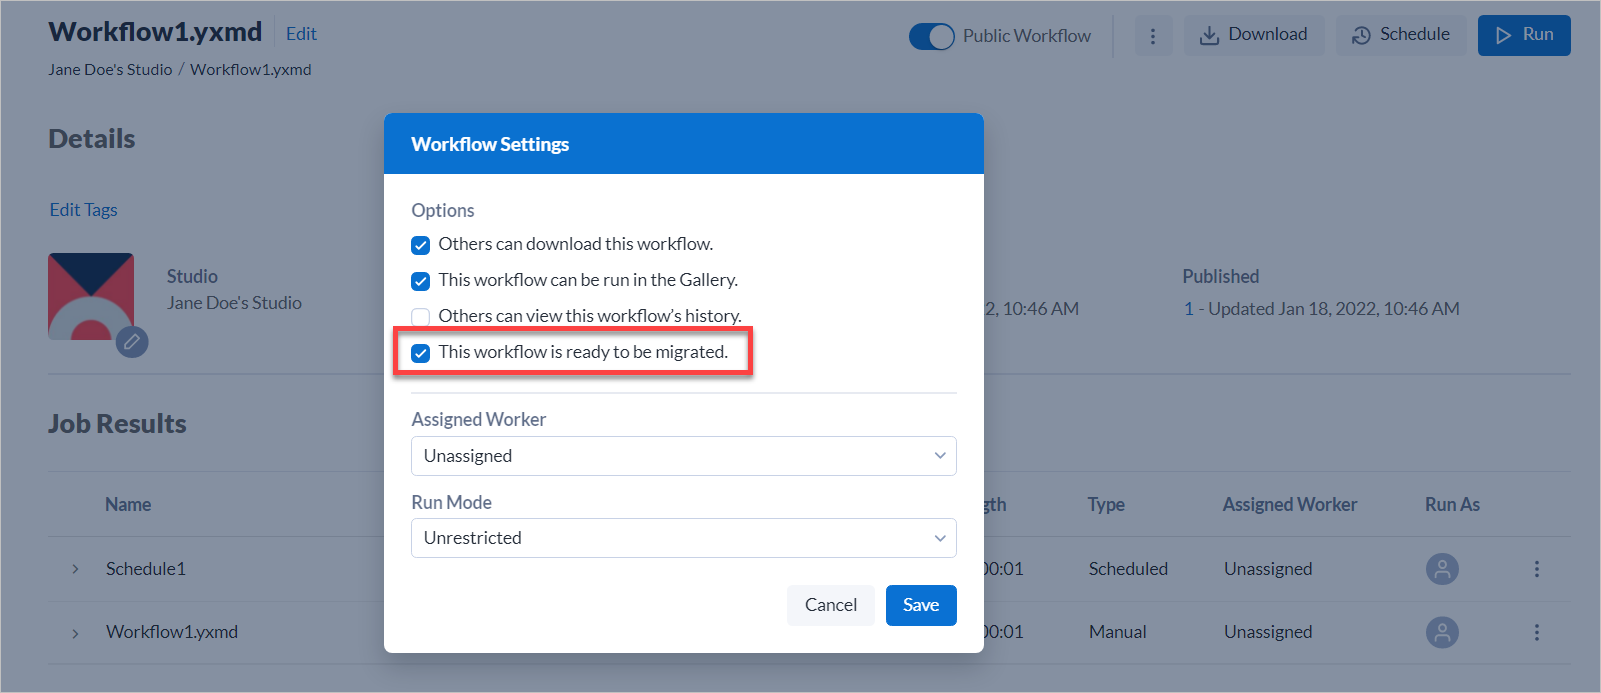 When enabled, Curators (Server admins) can indicate a workflow is ready to be promoted by selecting Yes for This workflow is ready to be migrated within a workflow.